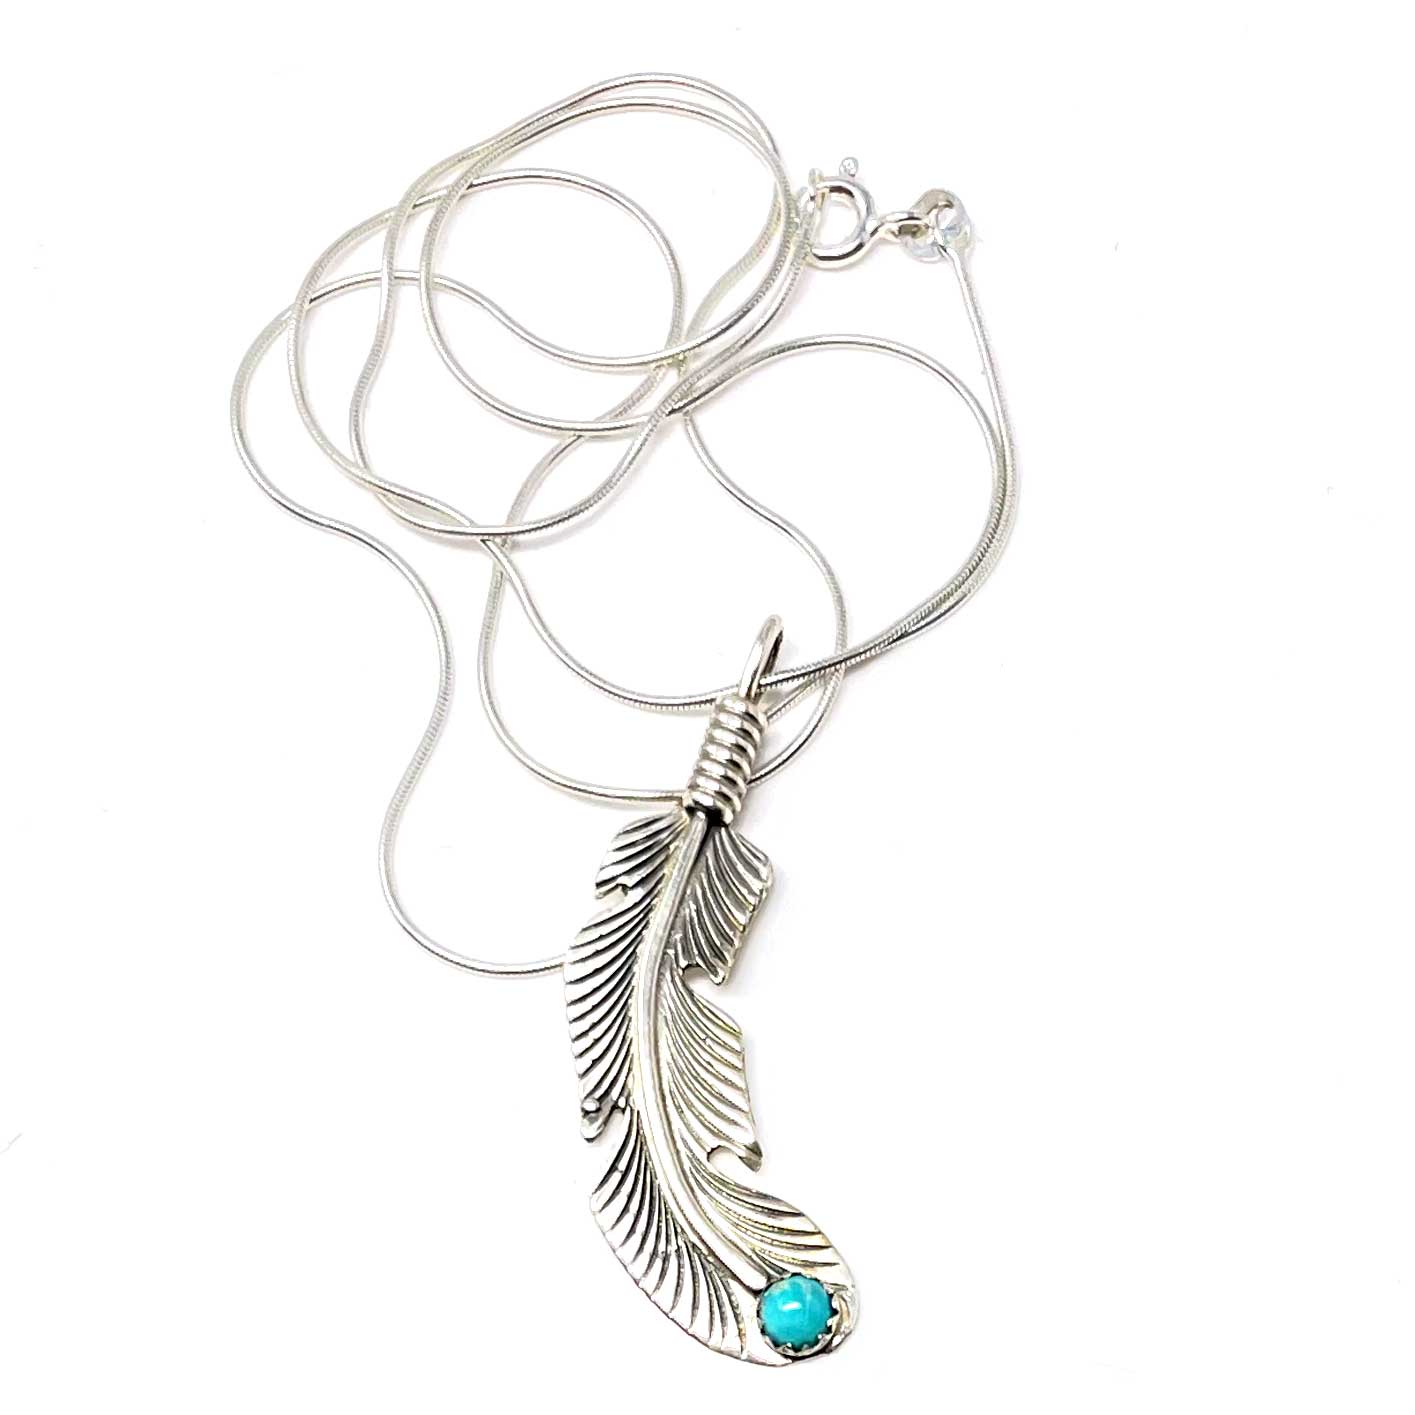 Vintage Peacock Feather Necklace Pendant Brass Tone 22